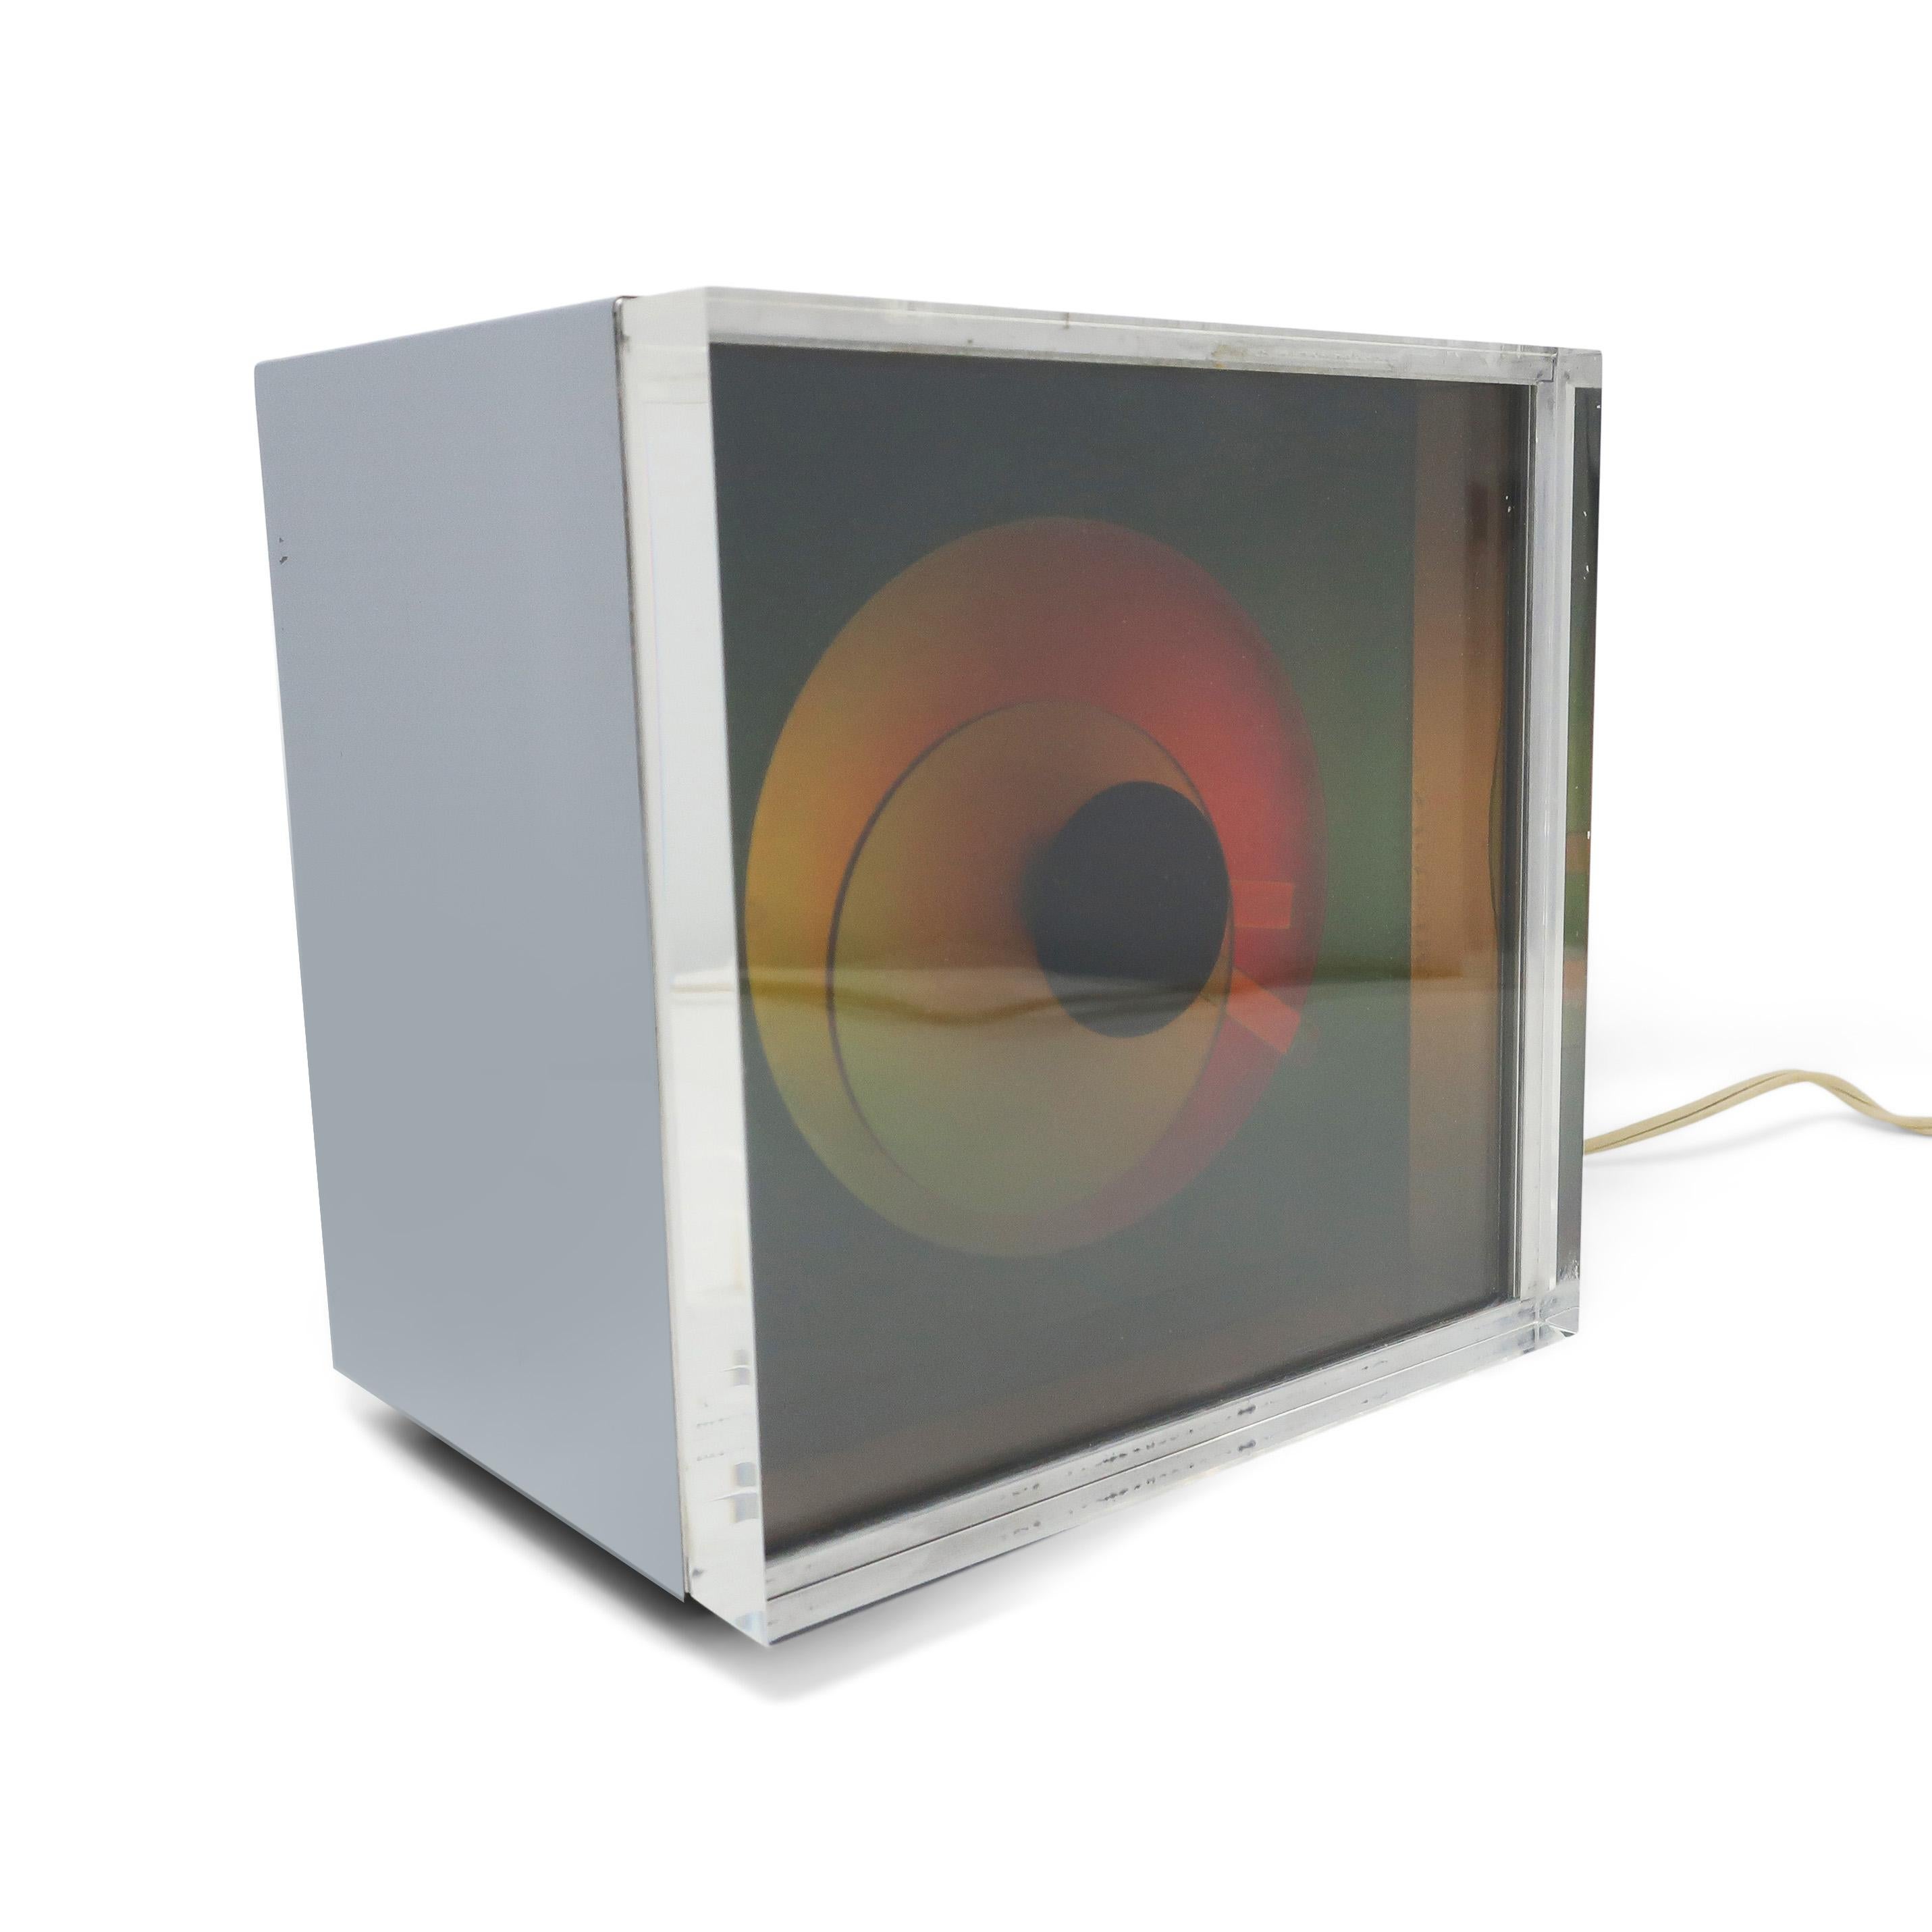 An op art inspired piece from 1976, the Prisma clock by Kirsch Hamilton Associates manages to capture vibrant colors, minimalism, and 1970s space age design. This mysterious color changing clock has a chrome body, thick lucite lens over laminated